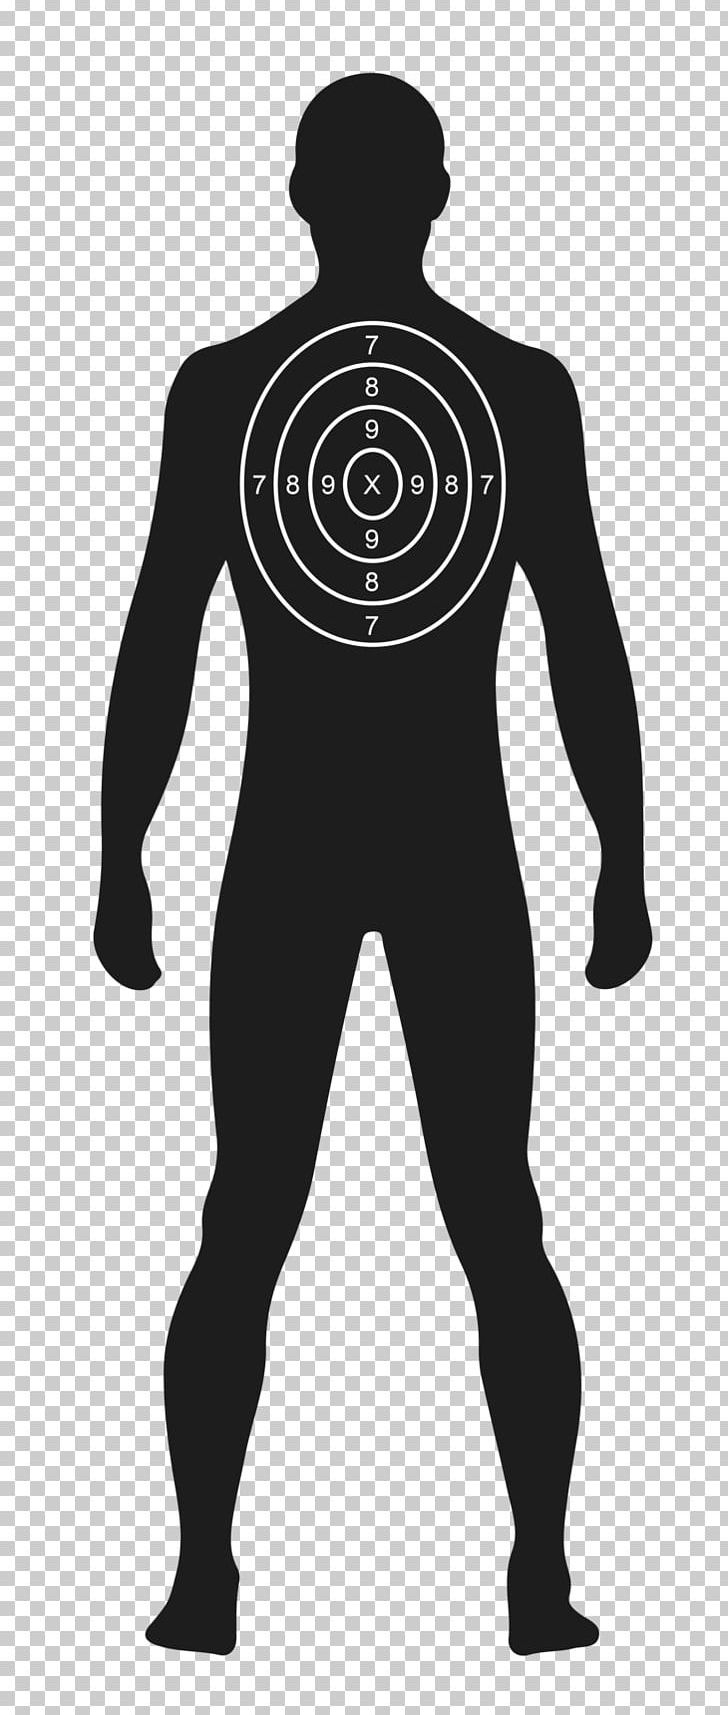 Shooting Target Human Target Practice Gun Homo Sapiens Character PNG, Clipart, Arm, Black, Black And White, Christopher Chance, Fictional Character Free PNG Download